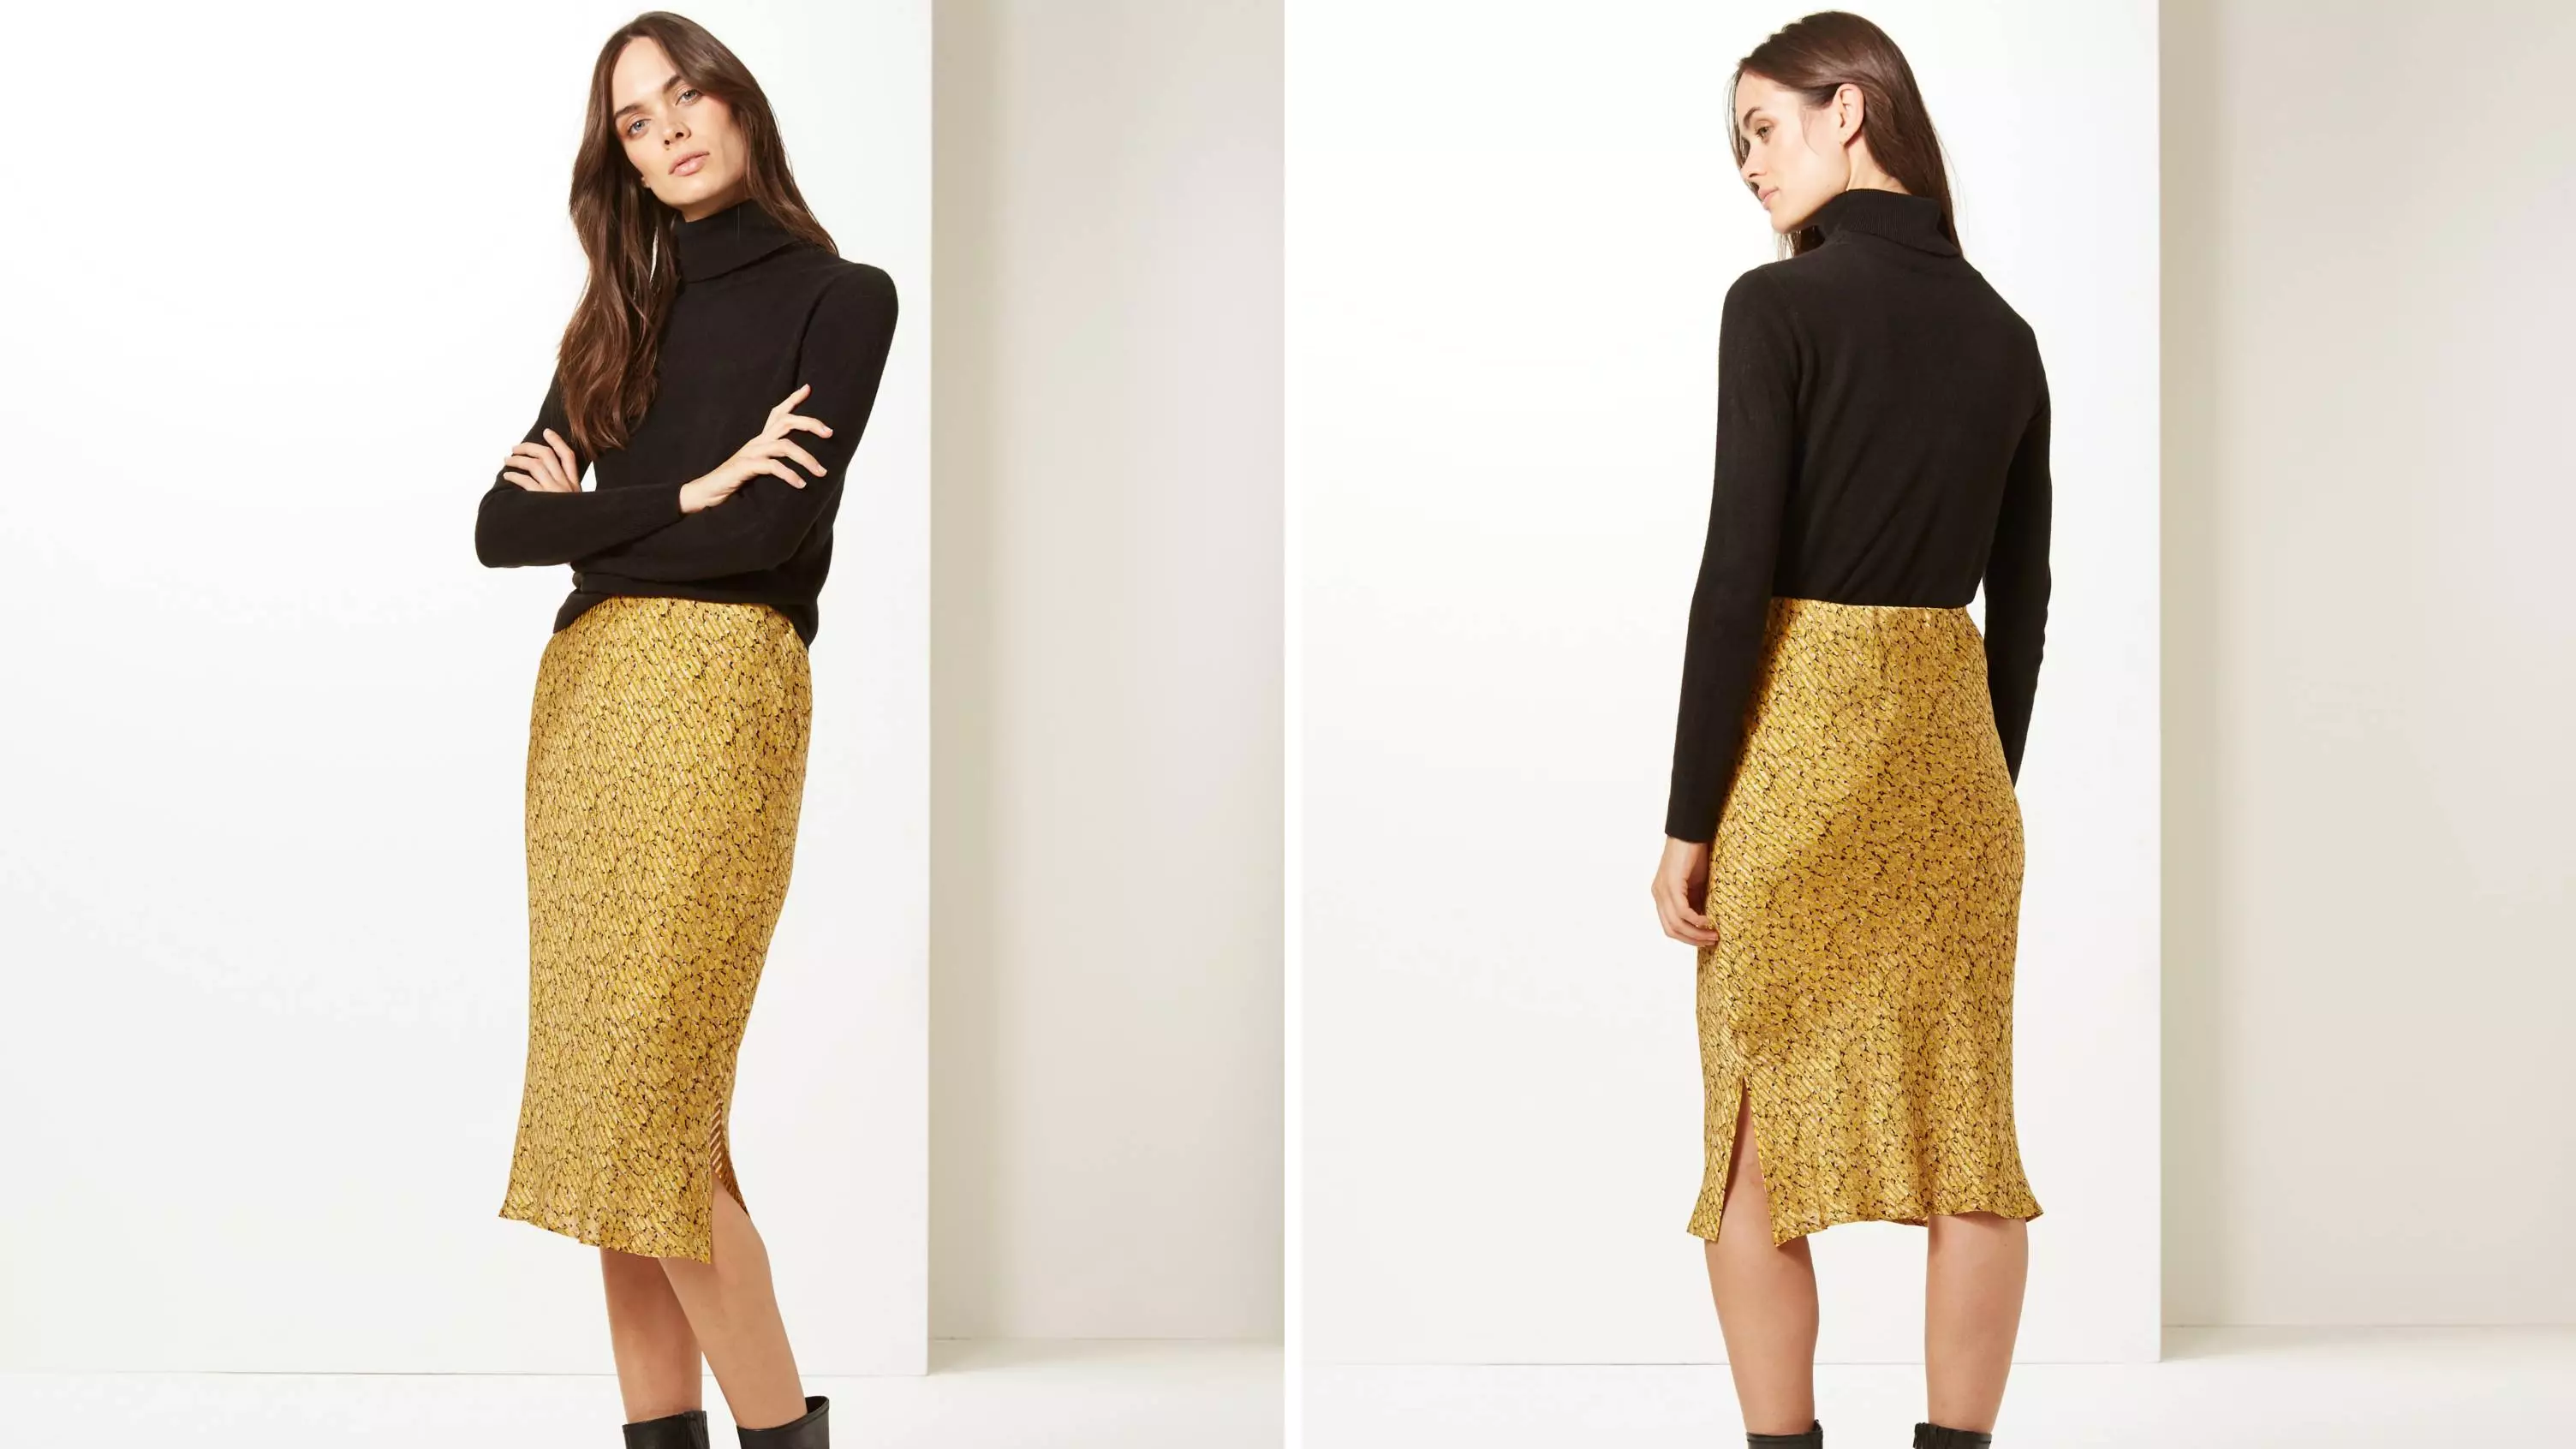 M&S Releases Skirt Version of Iconic Yellow Dress And It’s Selling Out